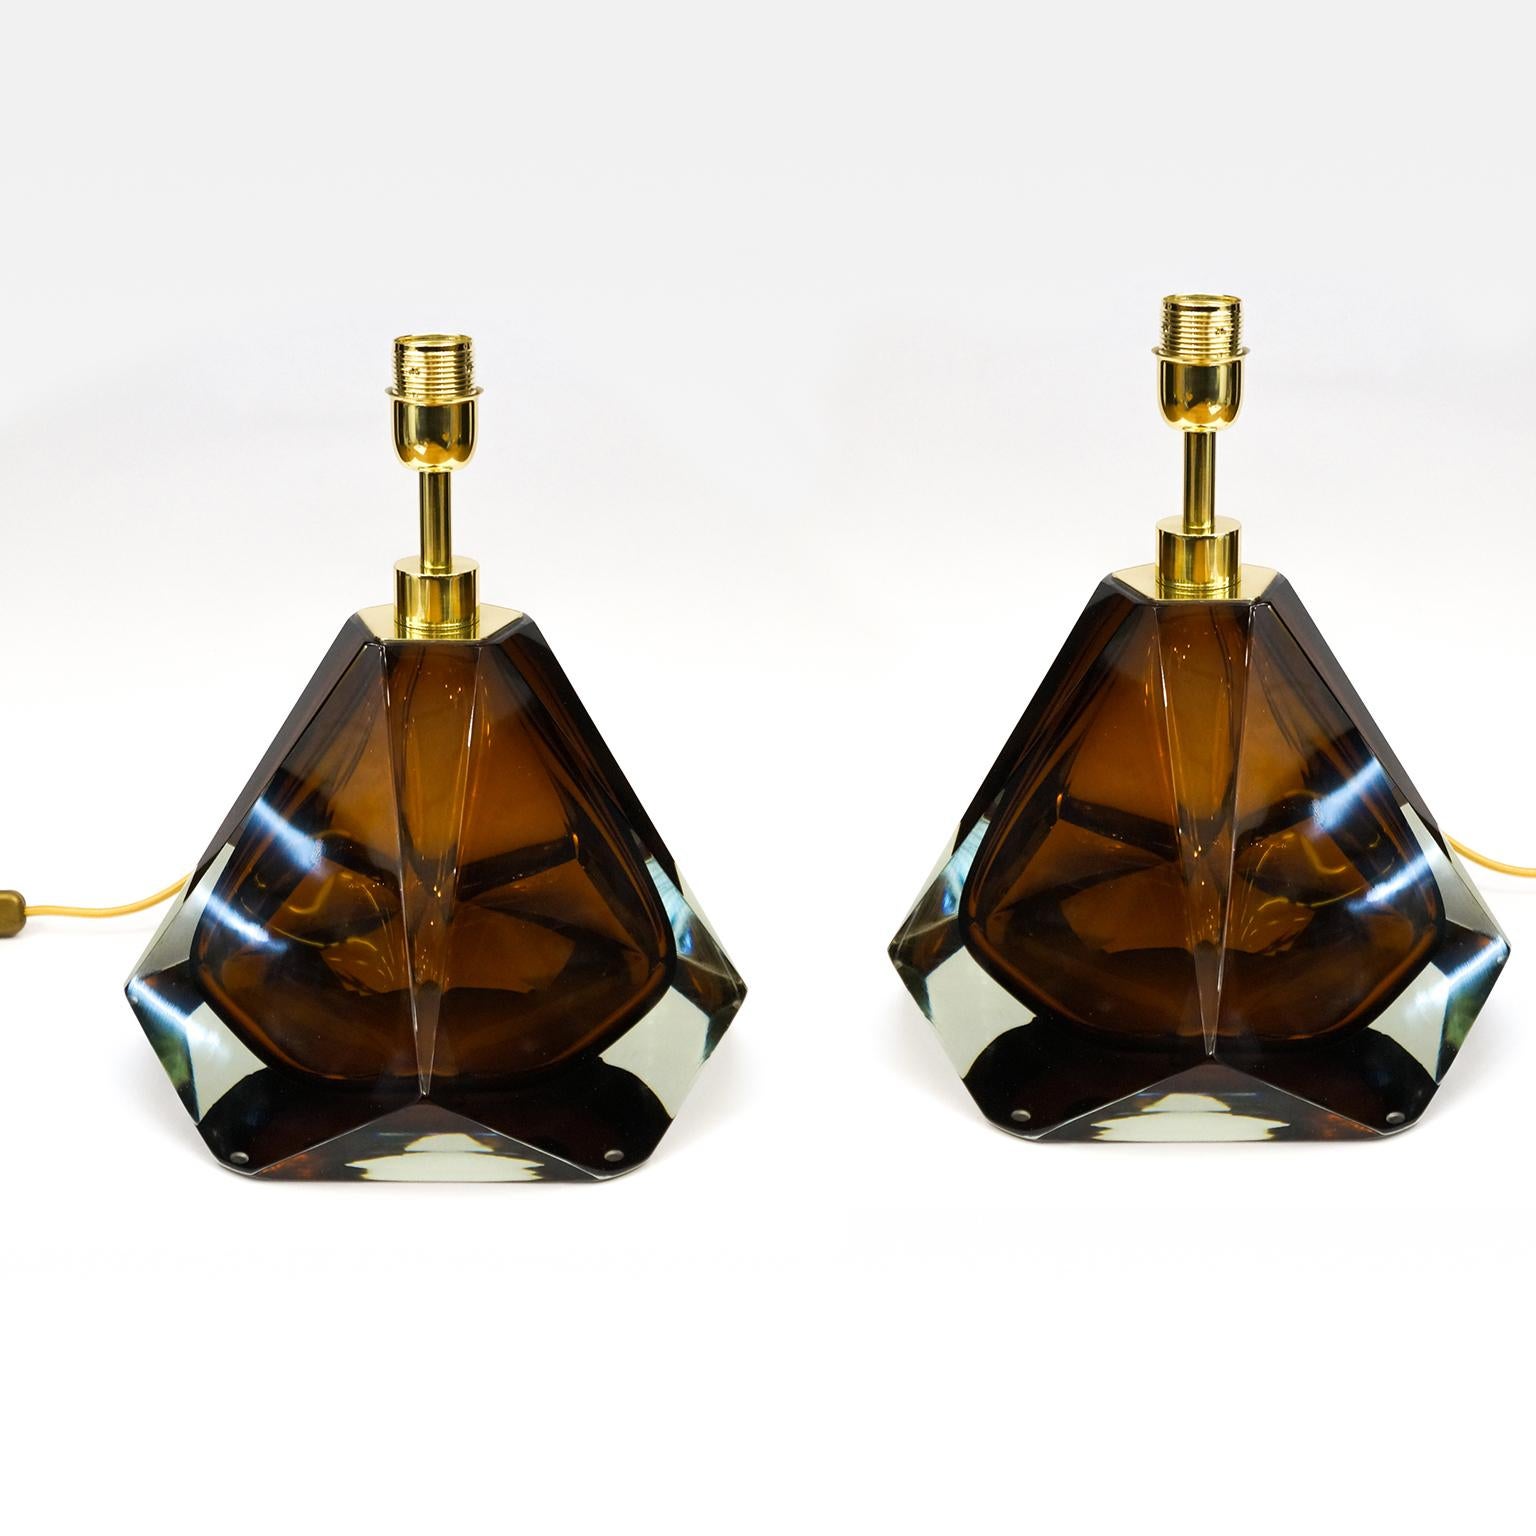 Italian Alberto Donà Mid-Century Modern Amber Pair of Murano Glass Table Lamps, 1995 For Sale